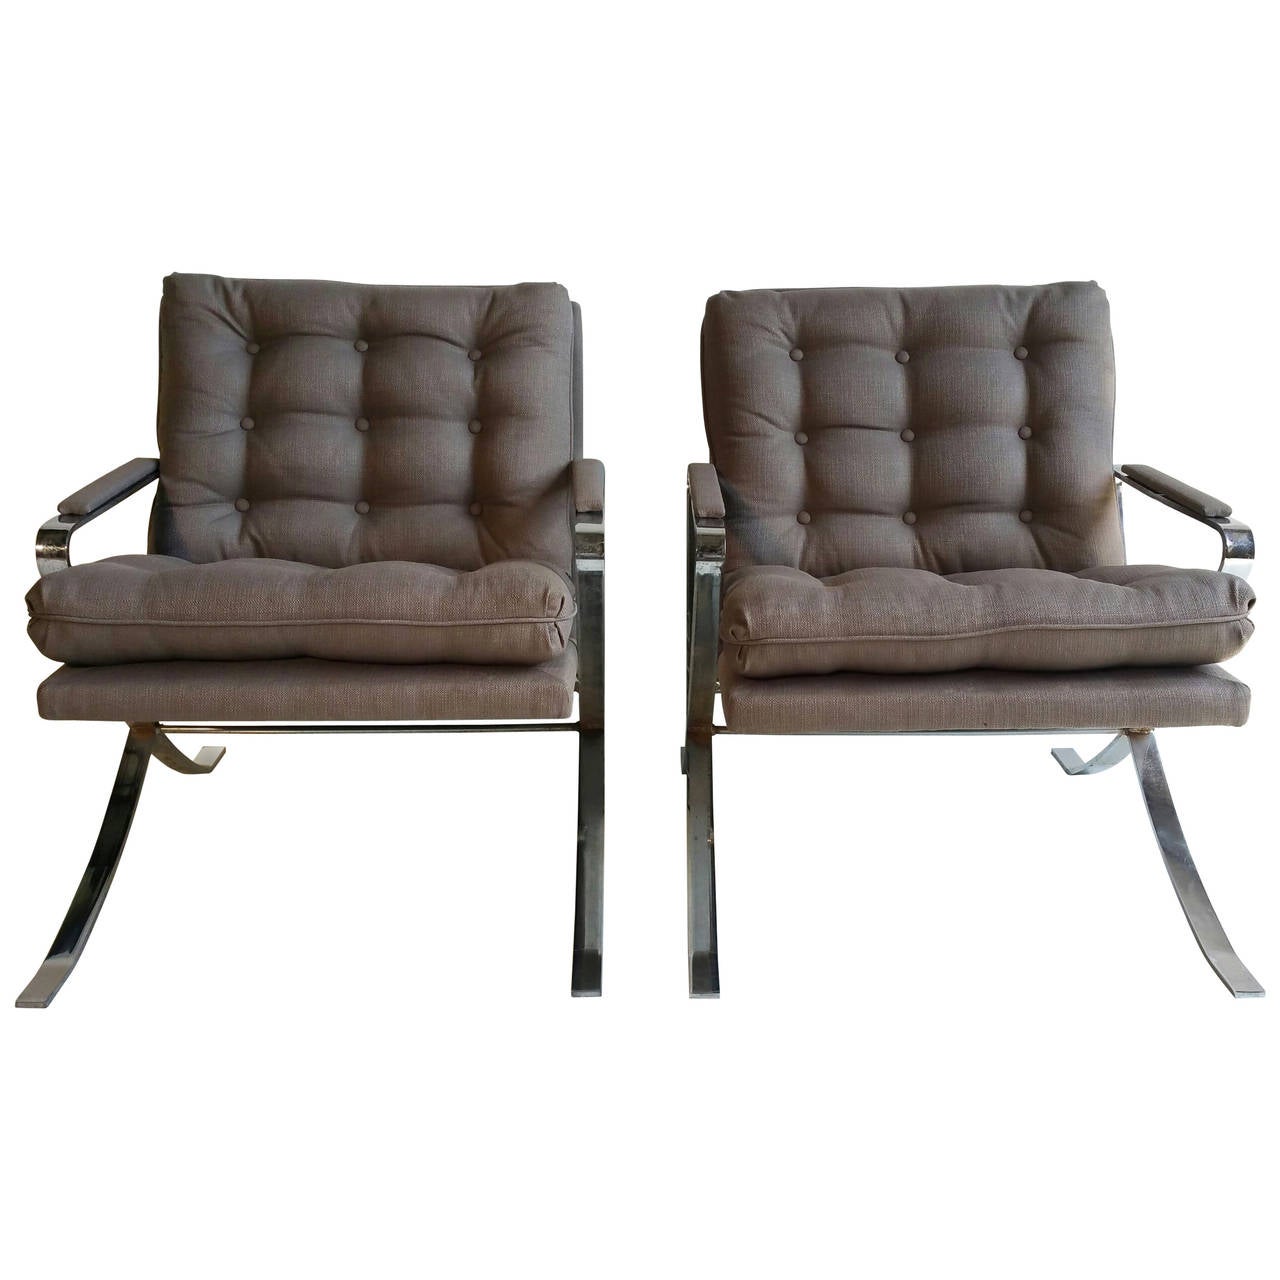 Pair of 1970s Flat Steel Chrome Lounge Chairs, Milo Baughman Inspired